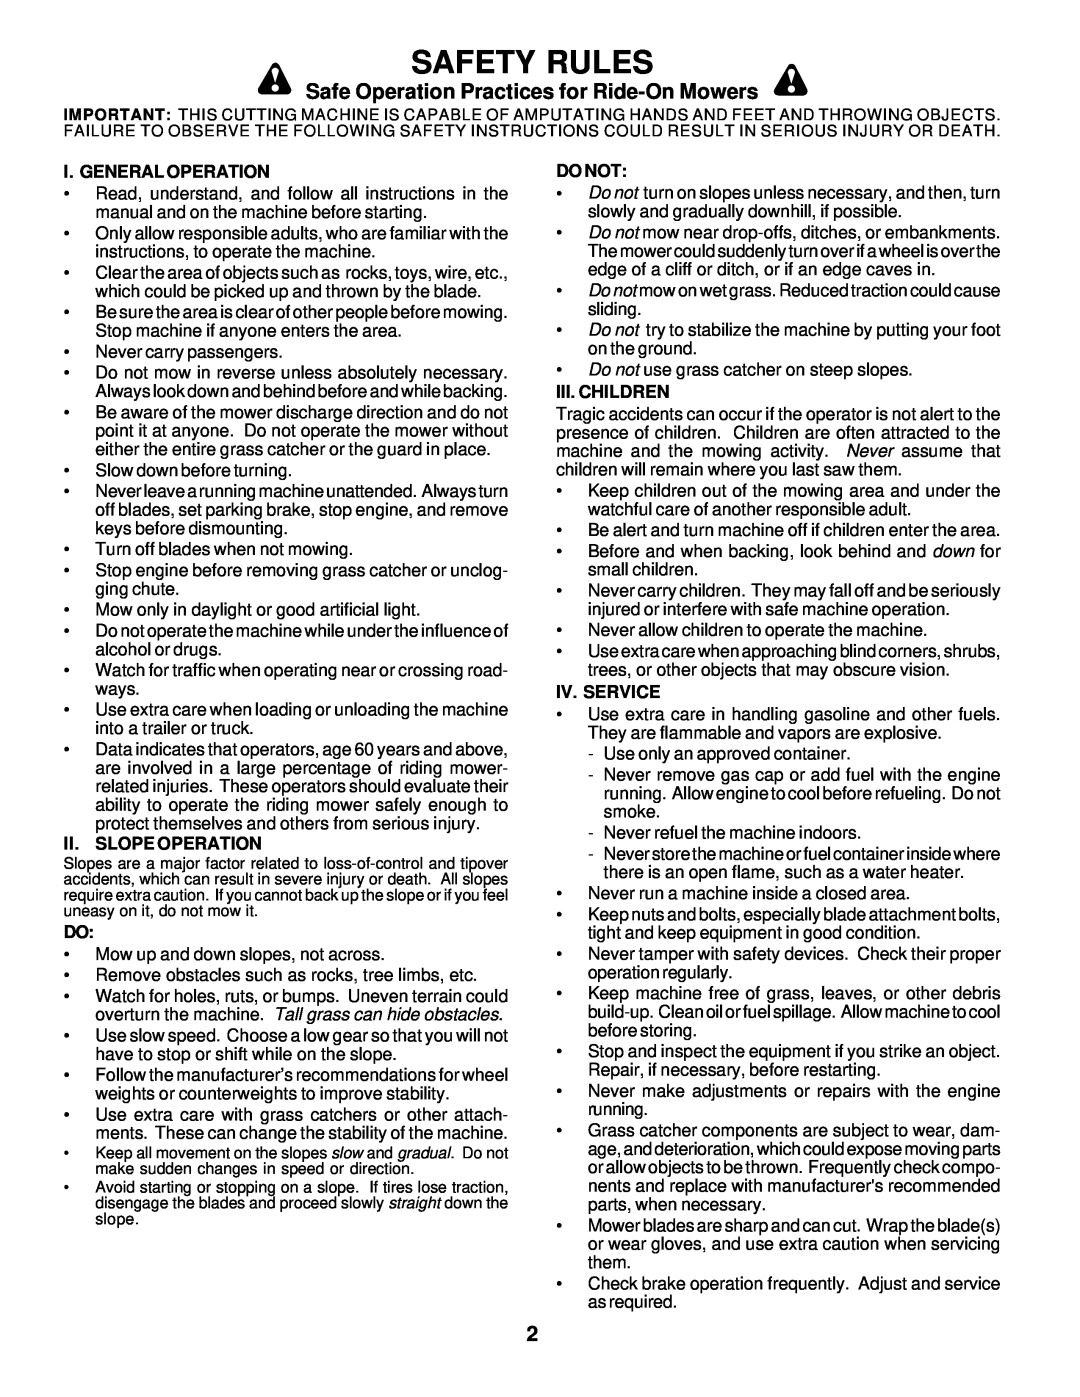 Poulan 176085 owner manual Safety Rules, Safe Operation Practices for Ride-On Mowers 